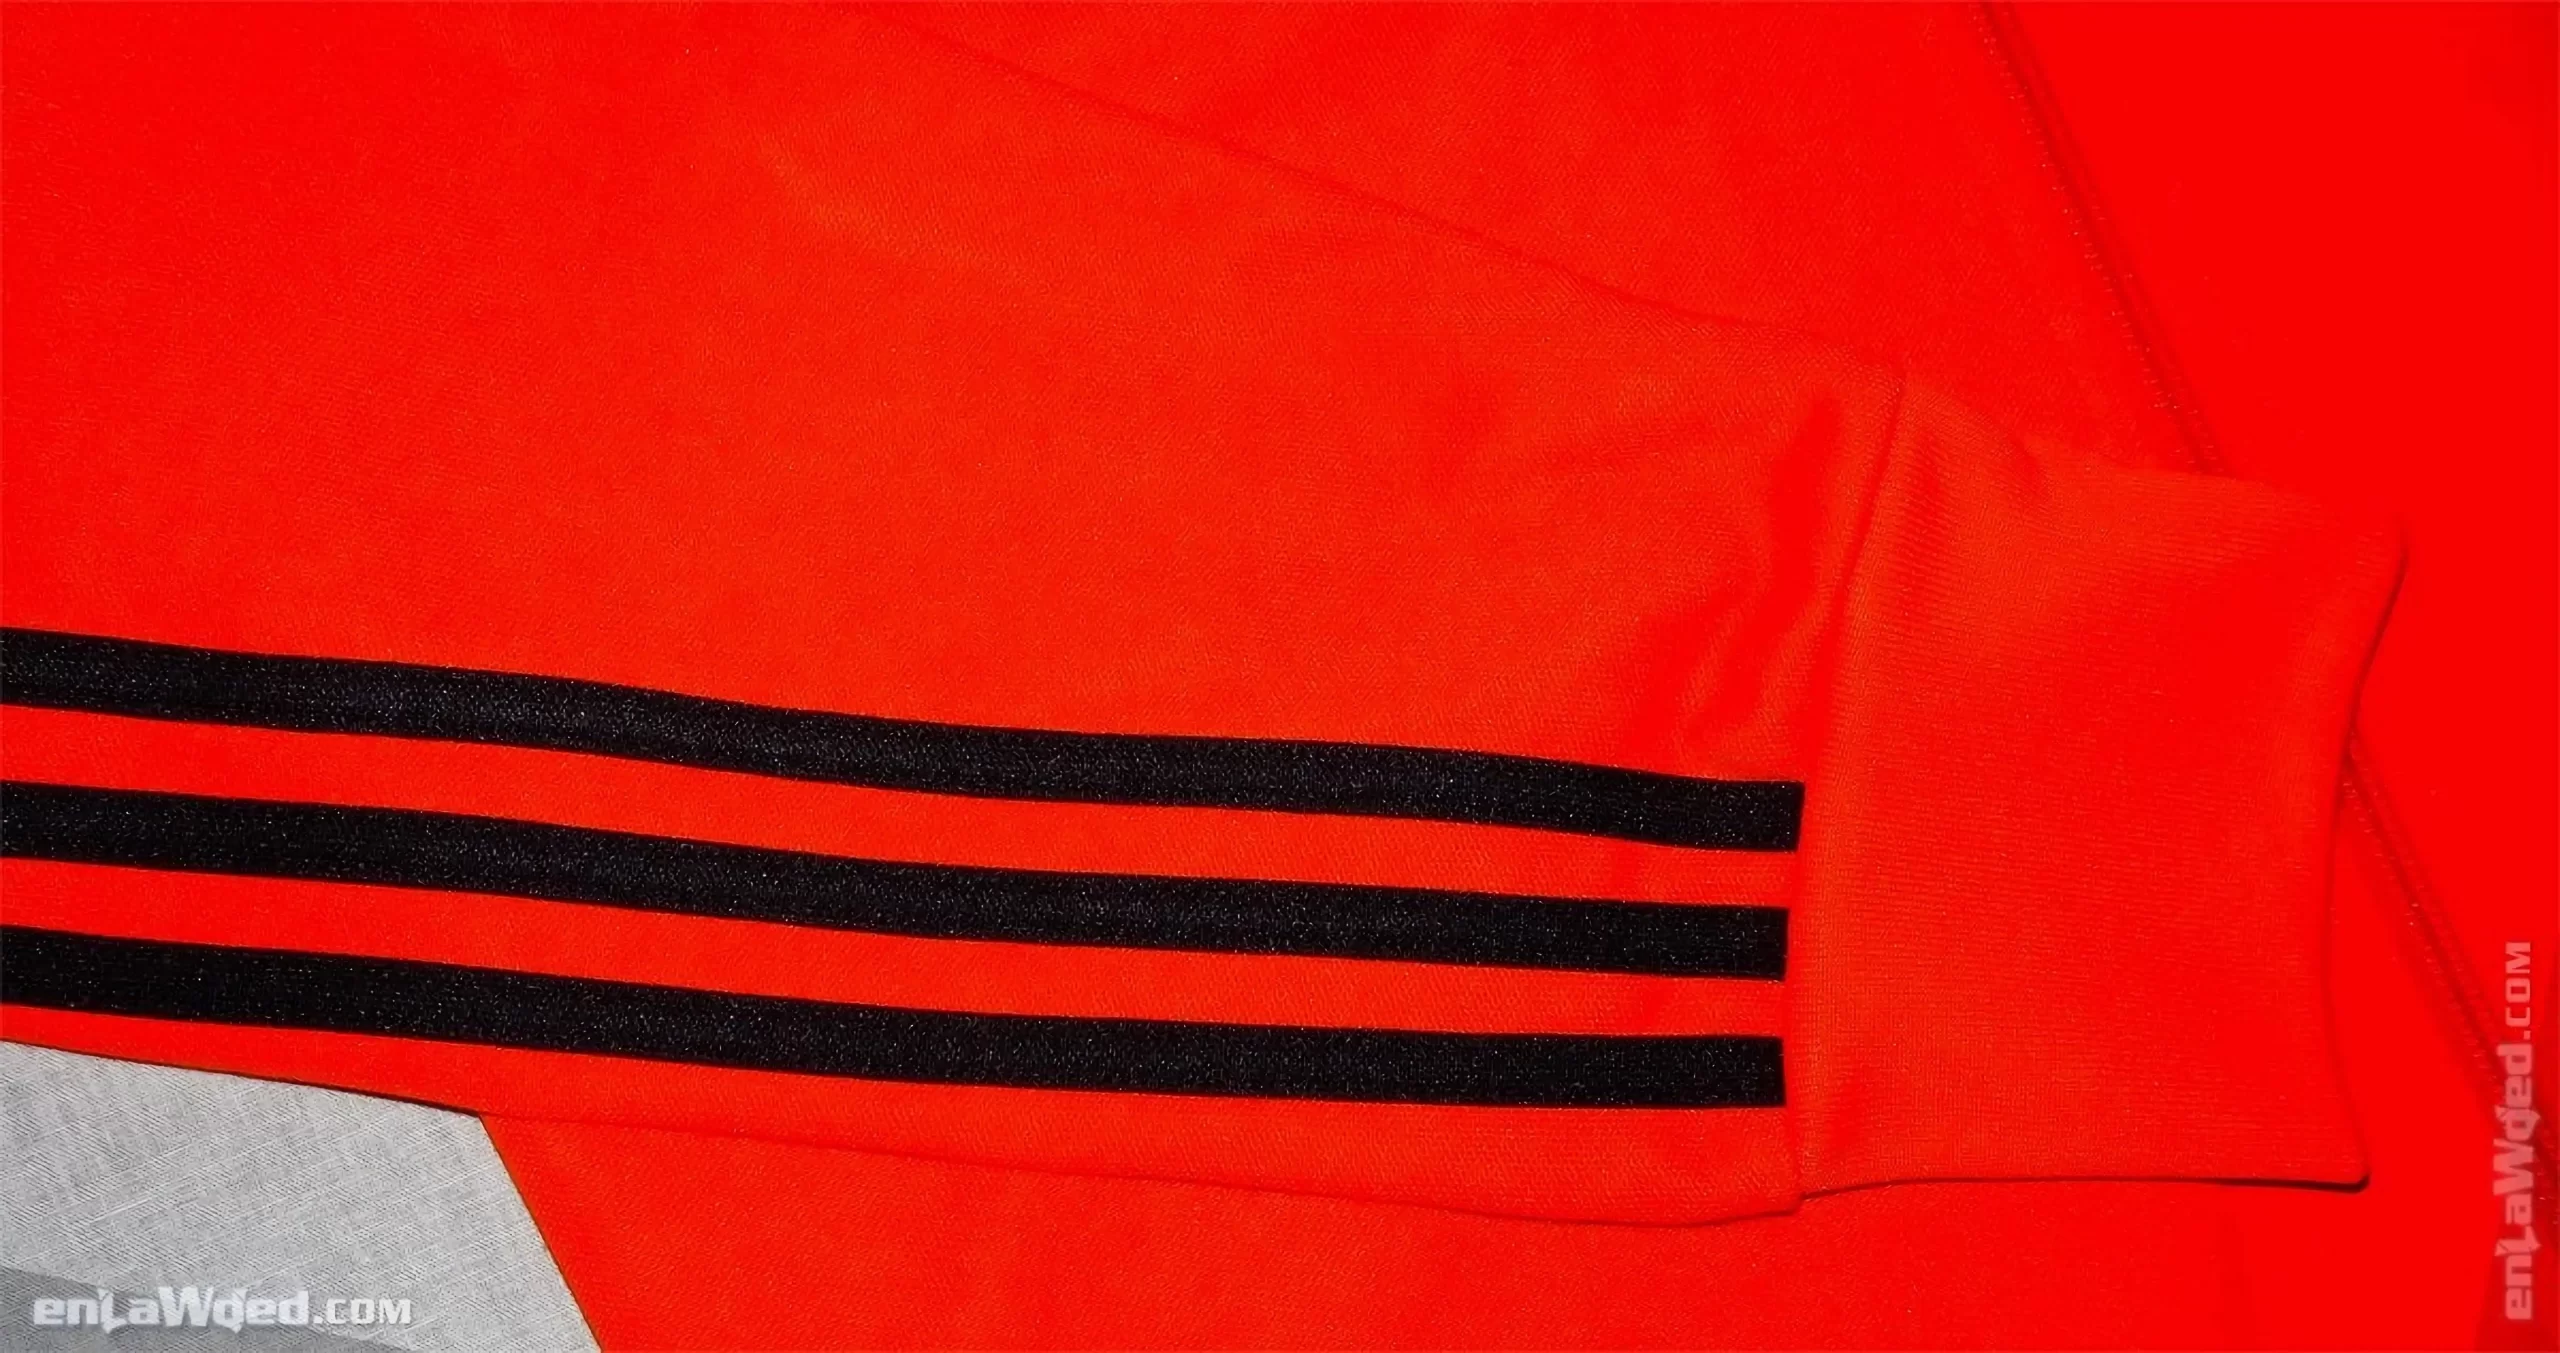 10th interior view of the Adidas Originals Netherlands 1974 Track Top